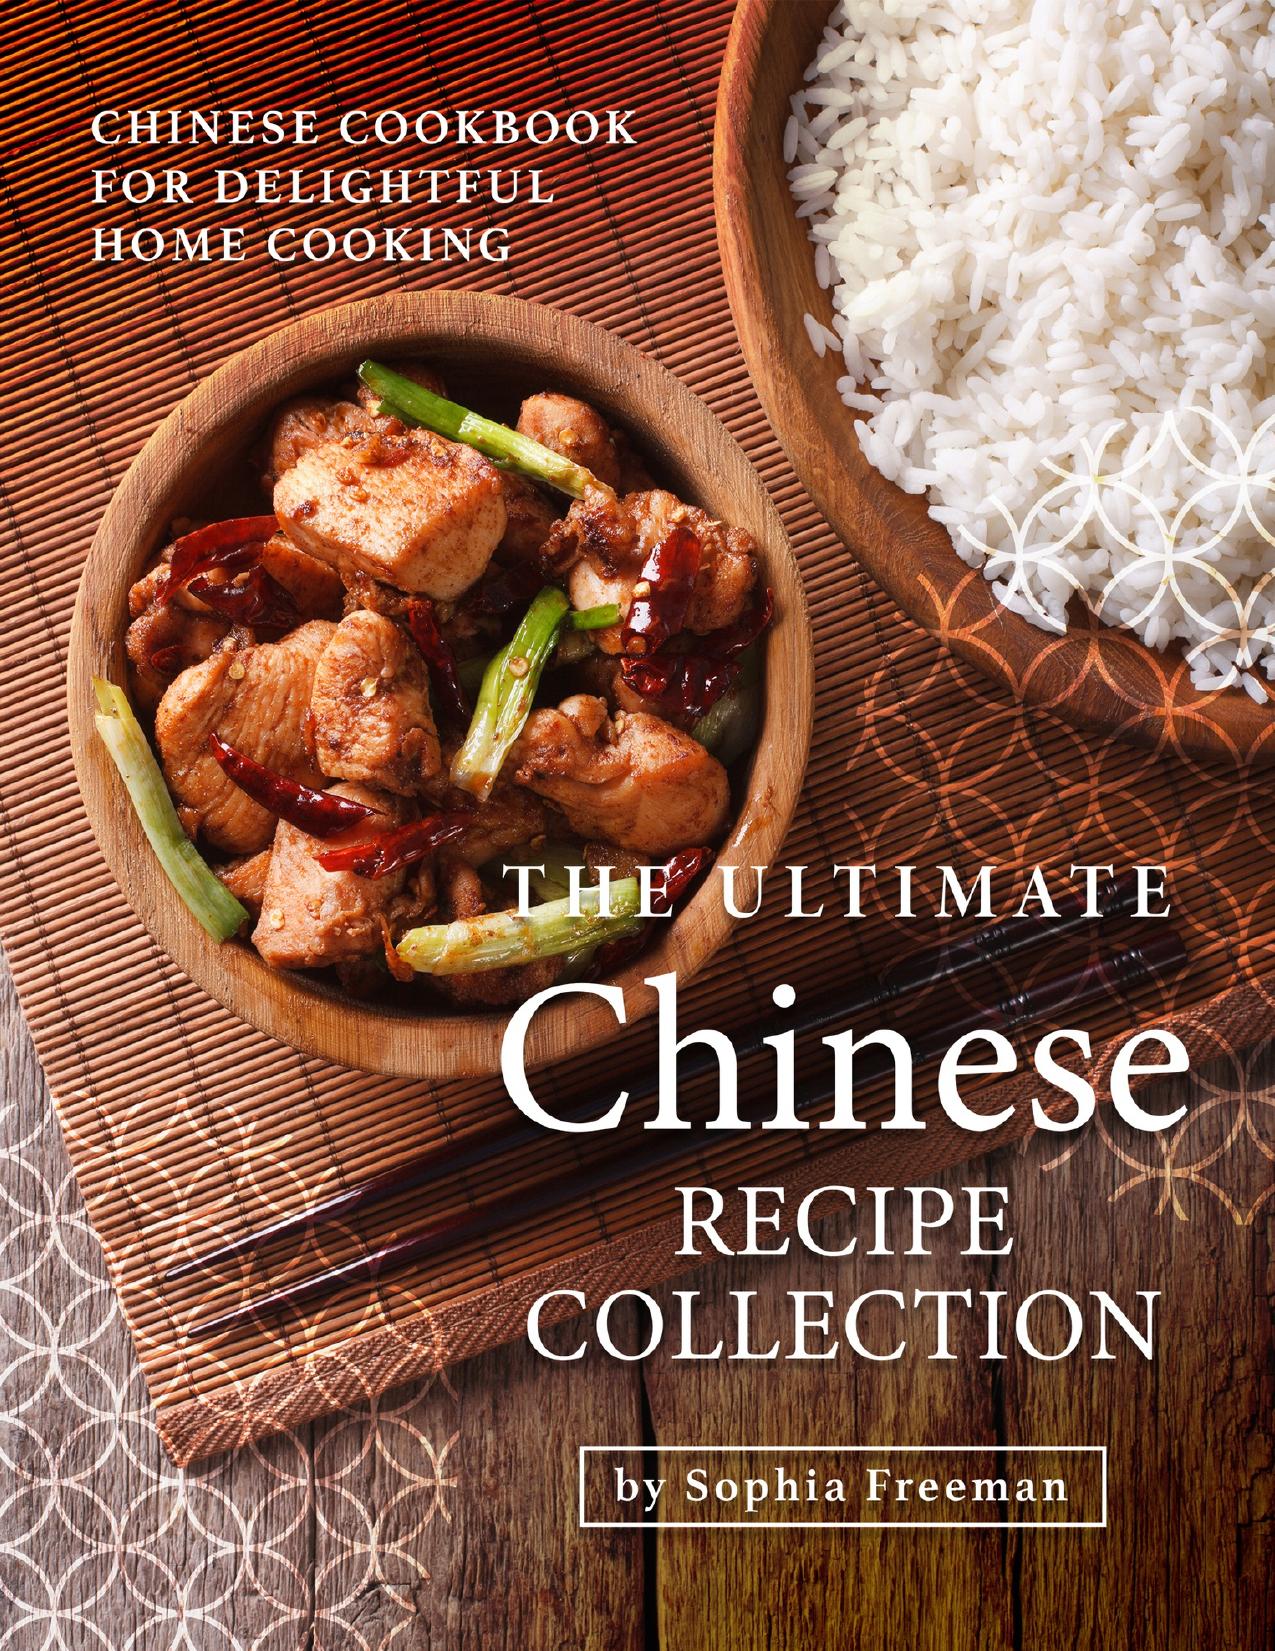 The Ultimate Chinese Recipe Collection: Chinese Cookbook for Delightful Home Cooking by Freeman Sophia